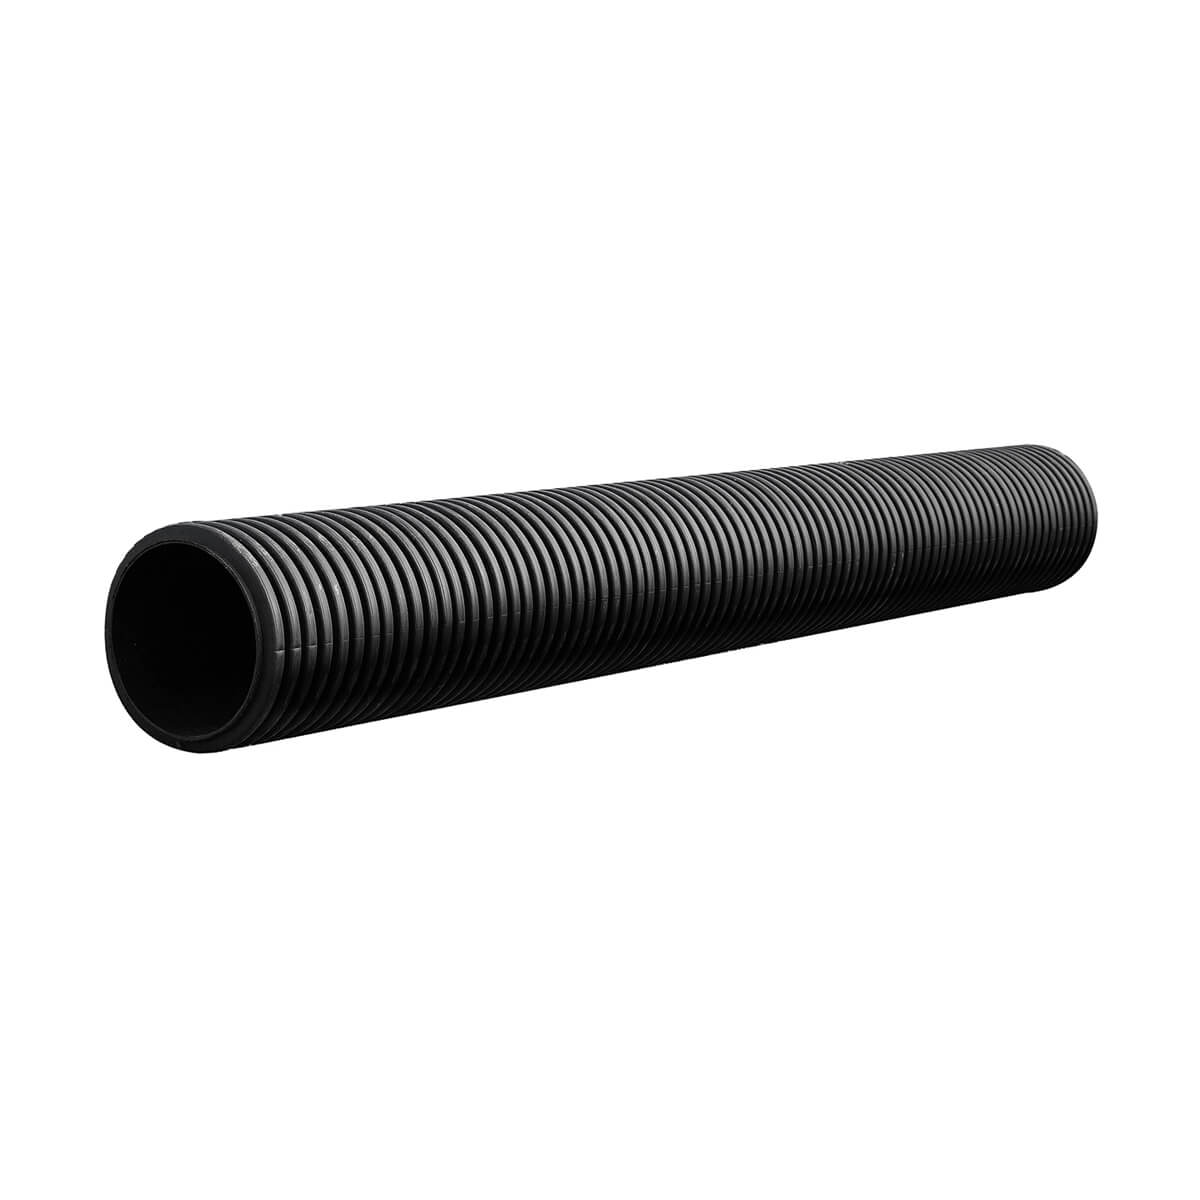 HDPE pipe - 8-in